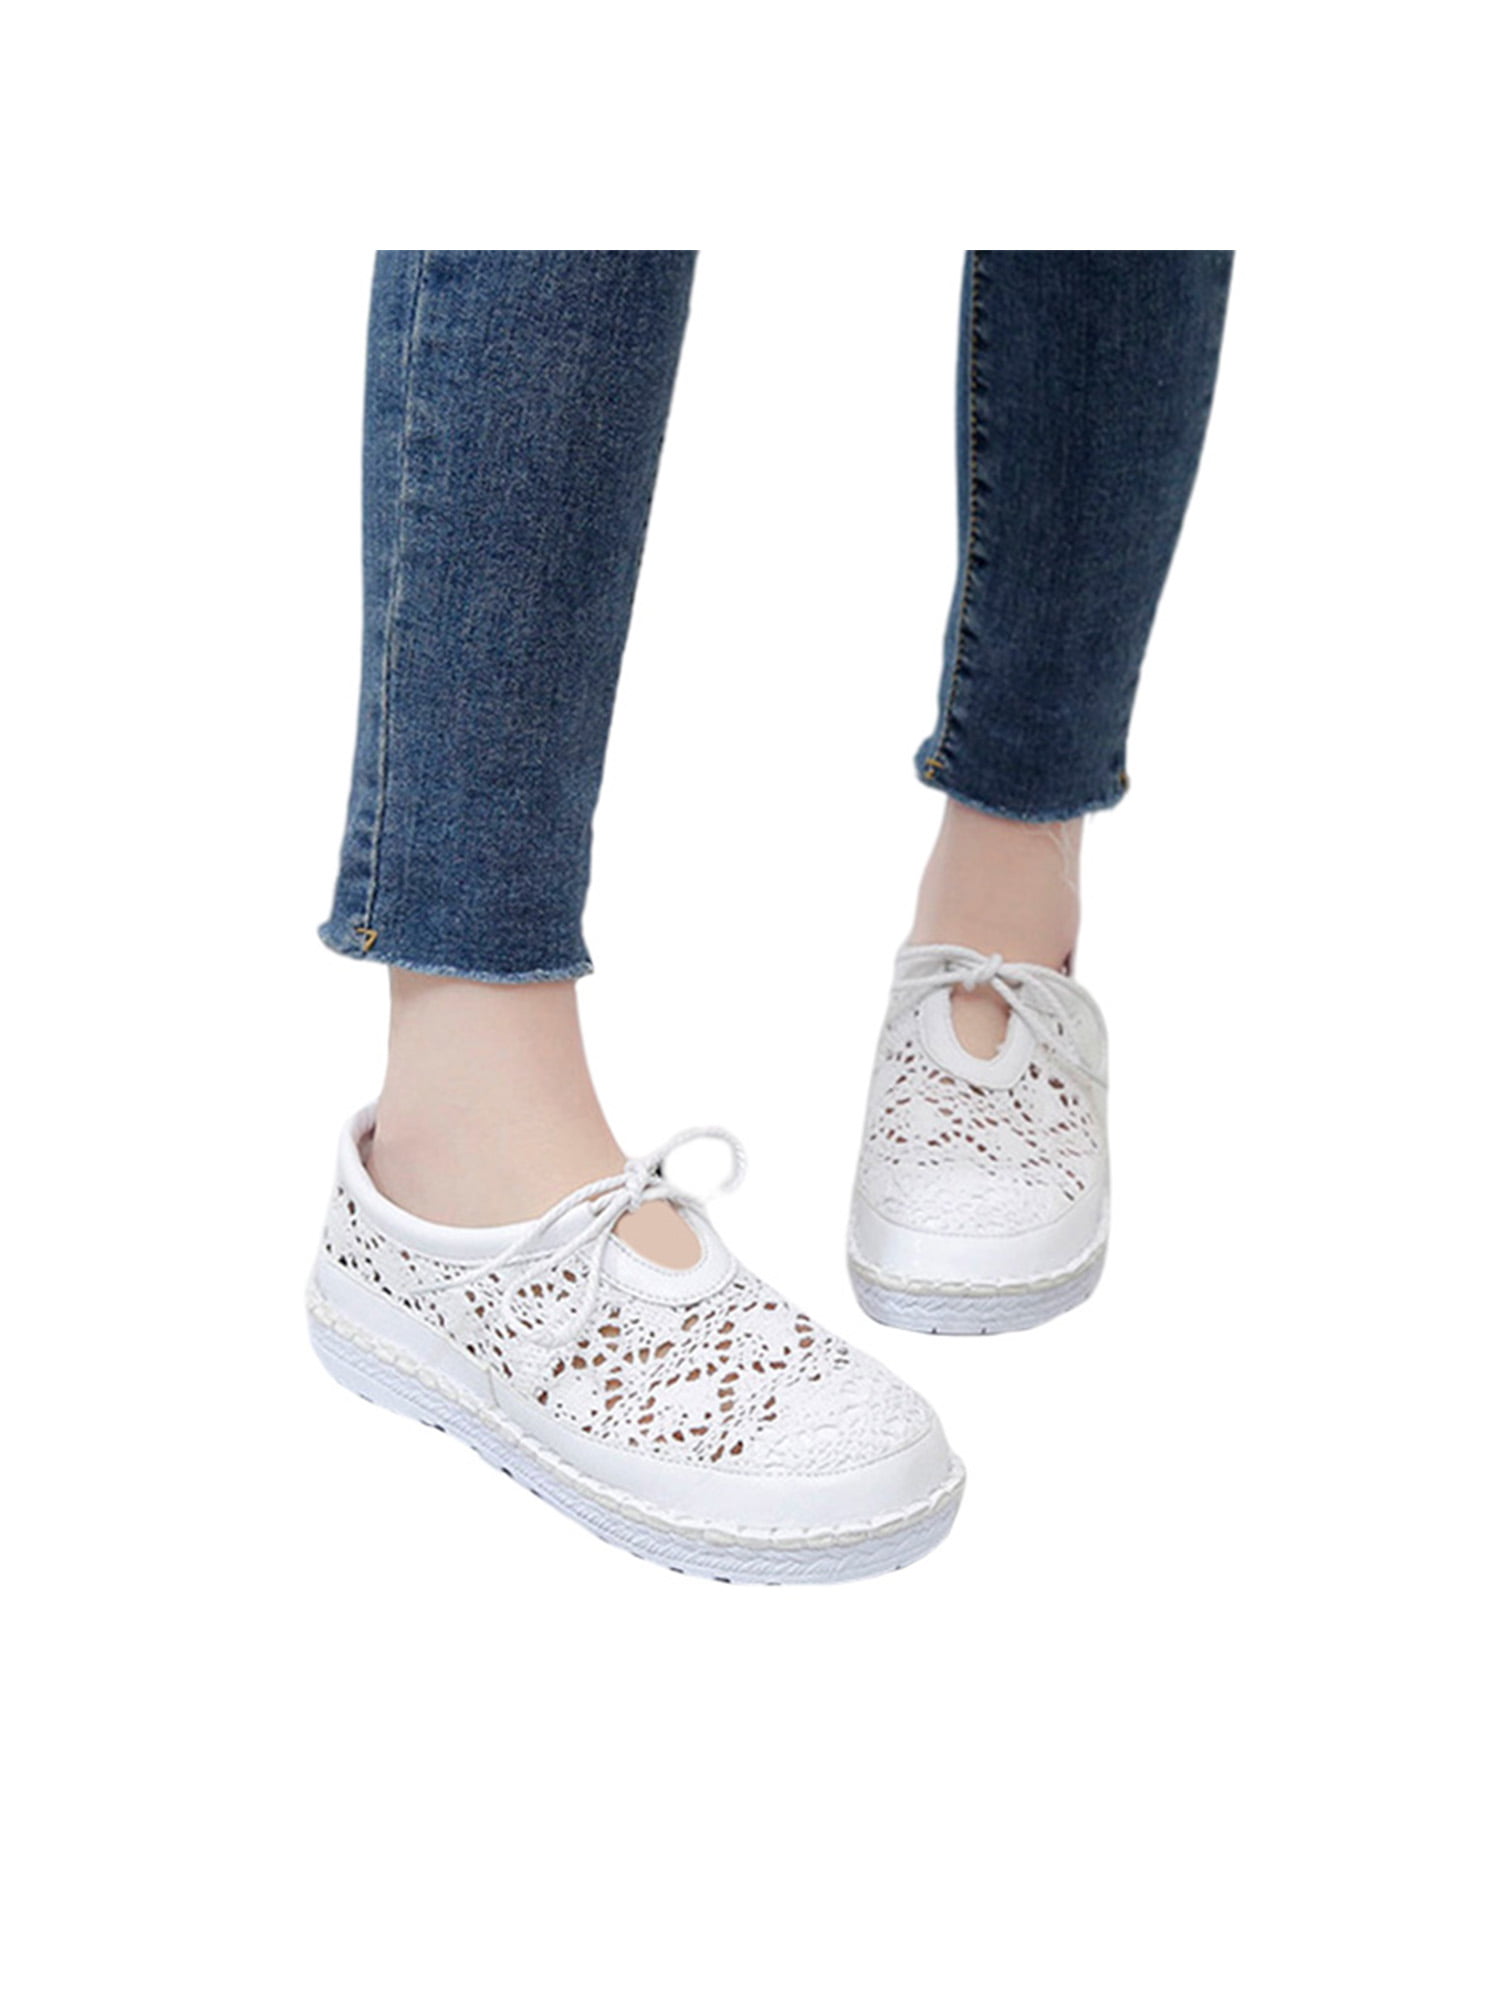 Details about   Fashion Women Loafers Lace up Casual Shoes Comfortable Thick Soles Shoes Woman 